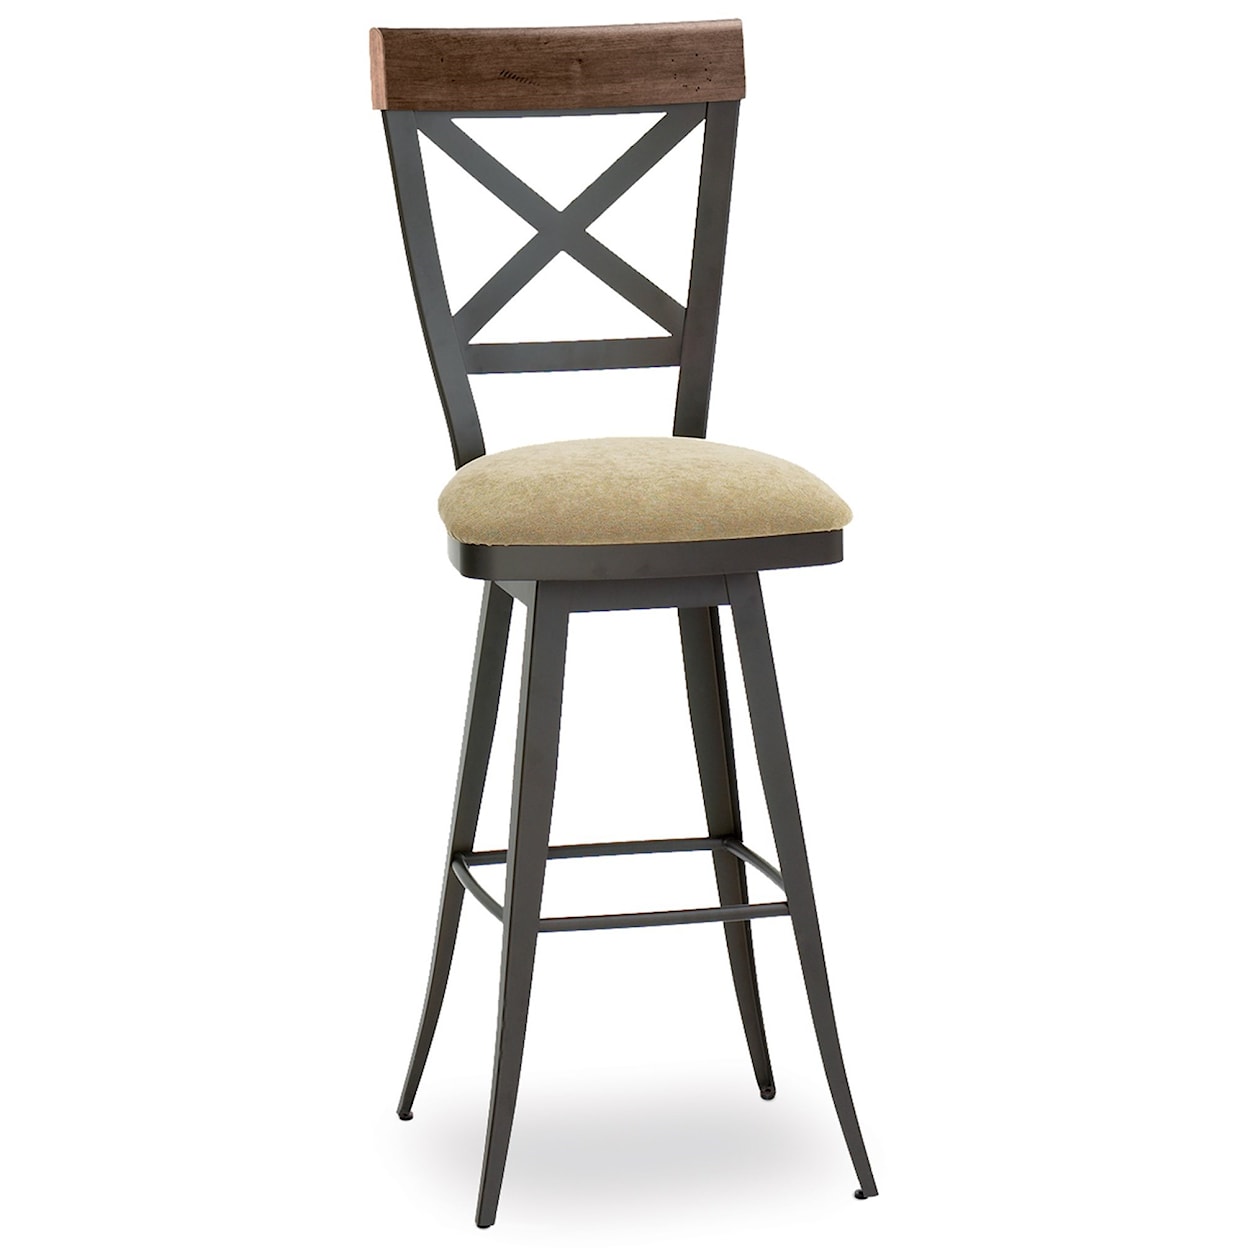 Amisco Industrial 30" Kyle Swivel Stool with Upholstered Seat